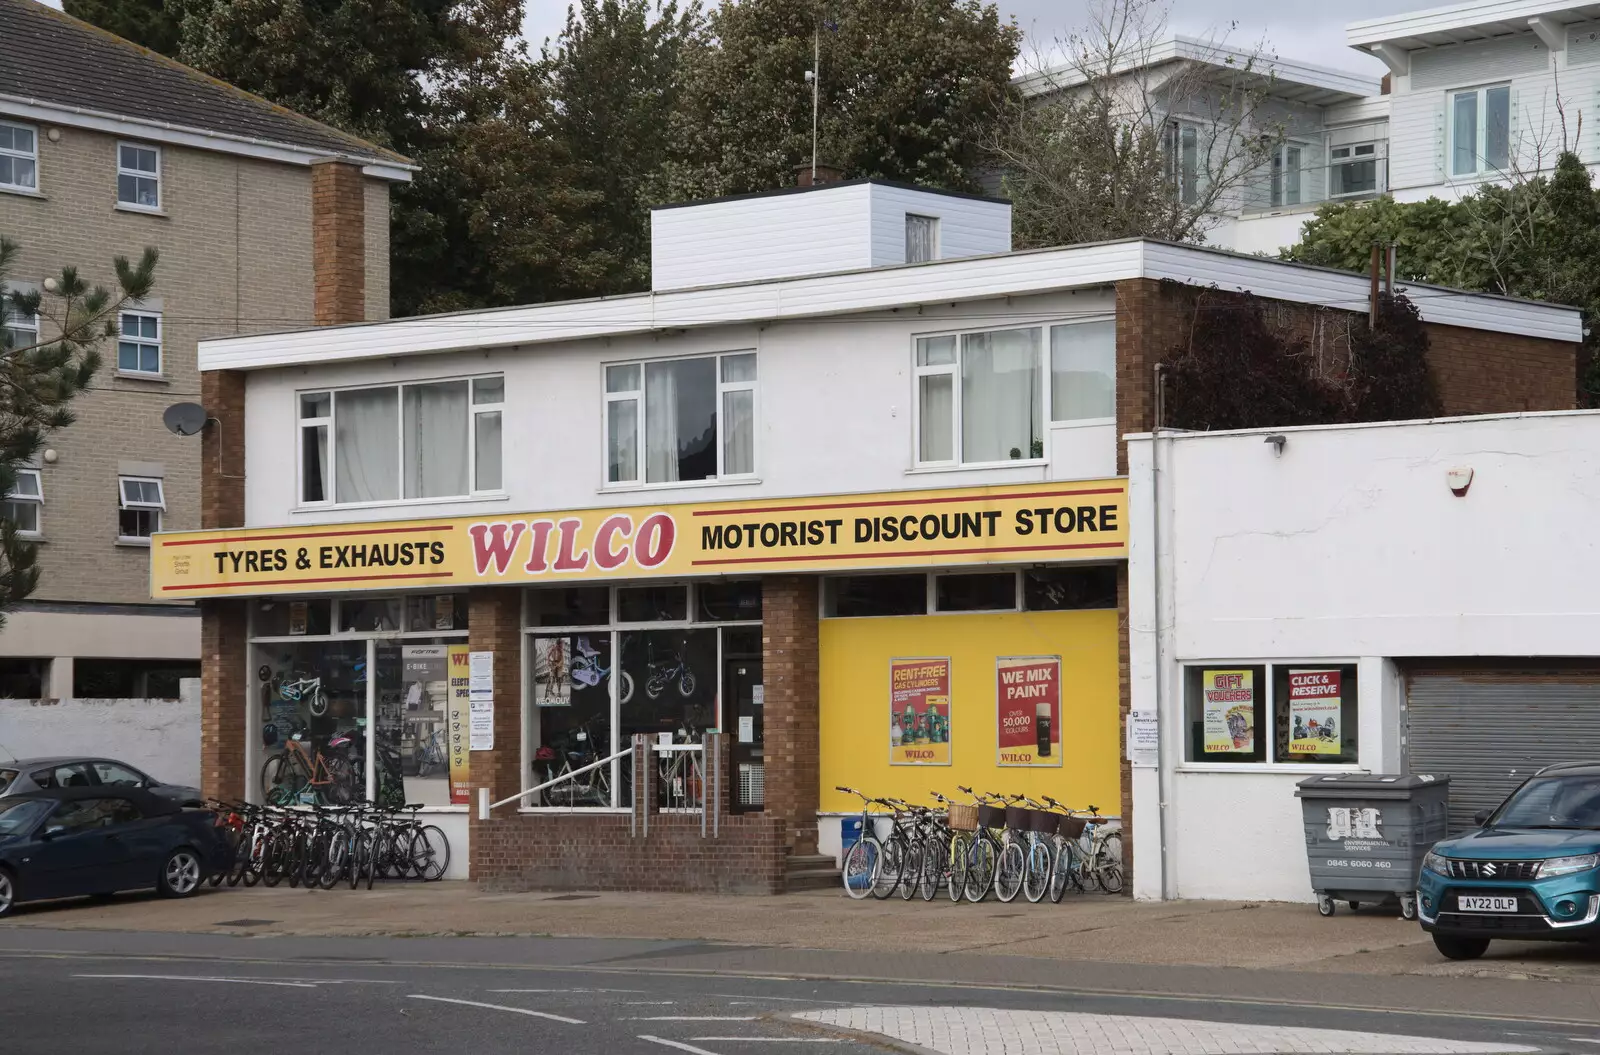 A 1970s classic Wilco motorist discount store, from A Postcard from Felixstowe, Suffolk - 5th October 2022